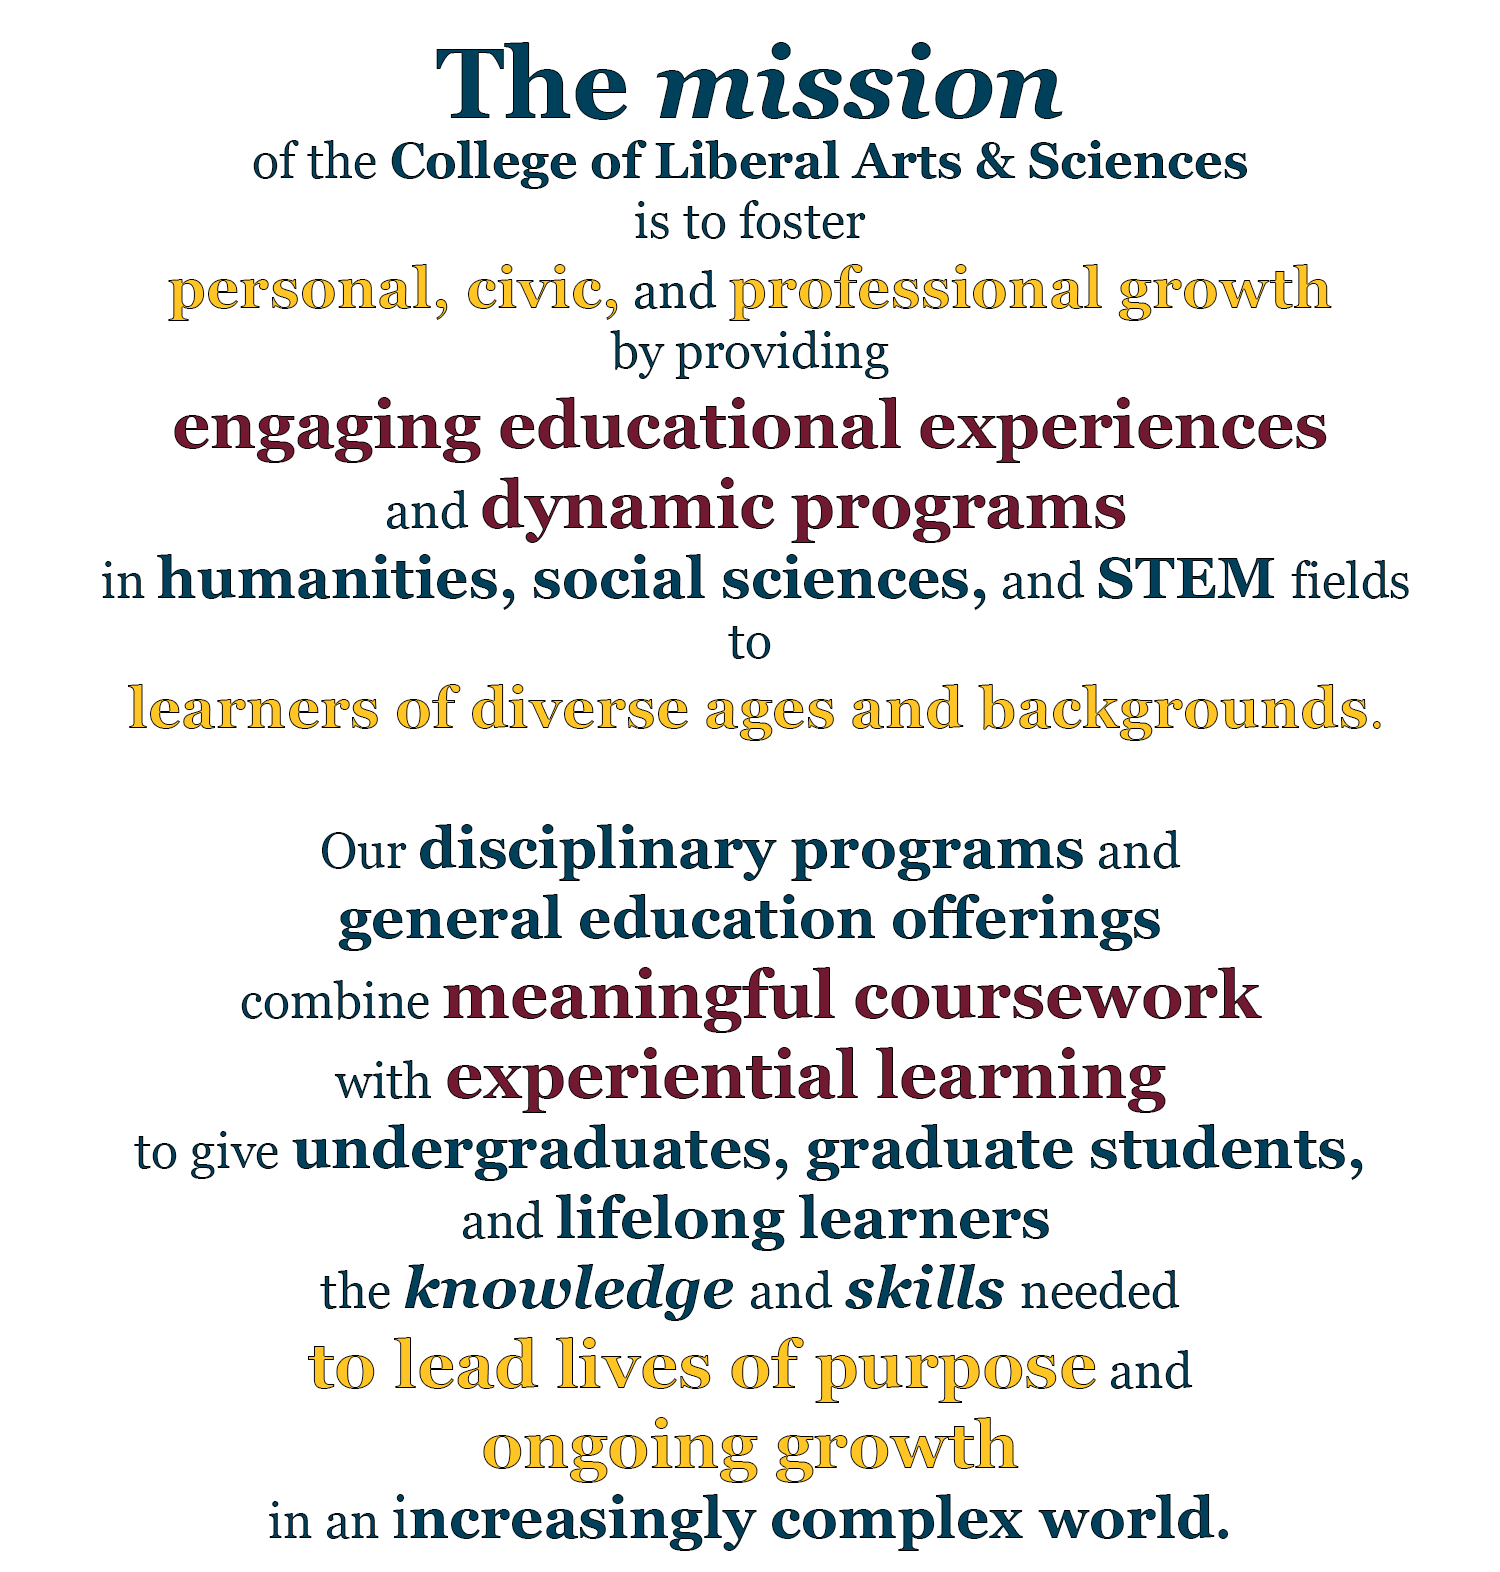 The mission of the College of Liberal Arts & Sciences is to foster personal, civic, and professional growth by providing engaging educational experiences and dynamic programs in humanities, social sciences, and STEM fields to learners of diverse ages and backgrounds.  Our disciplinary programs and general education offerings combine meaningful coursework with experiential learning to give undergraduates, graduate students, and lifelong learners the knowledge and skills needed to lead lives of purpose and ongoing growth in an increasingly complex world.